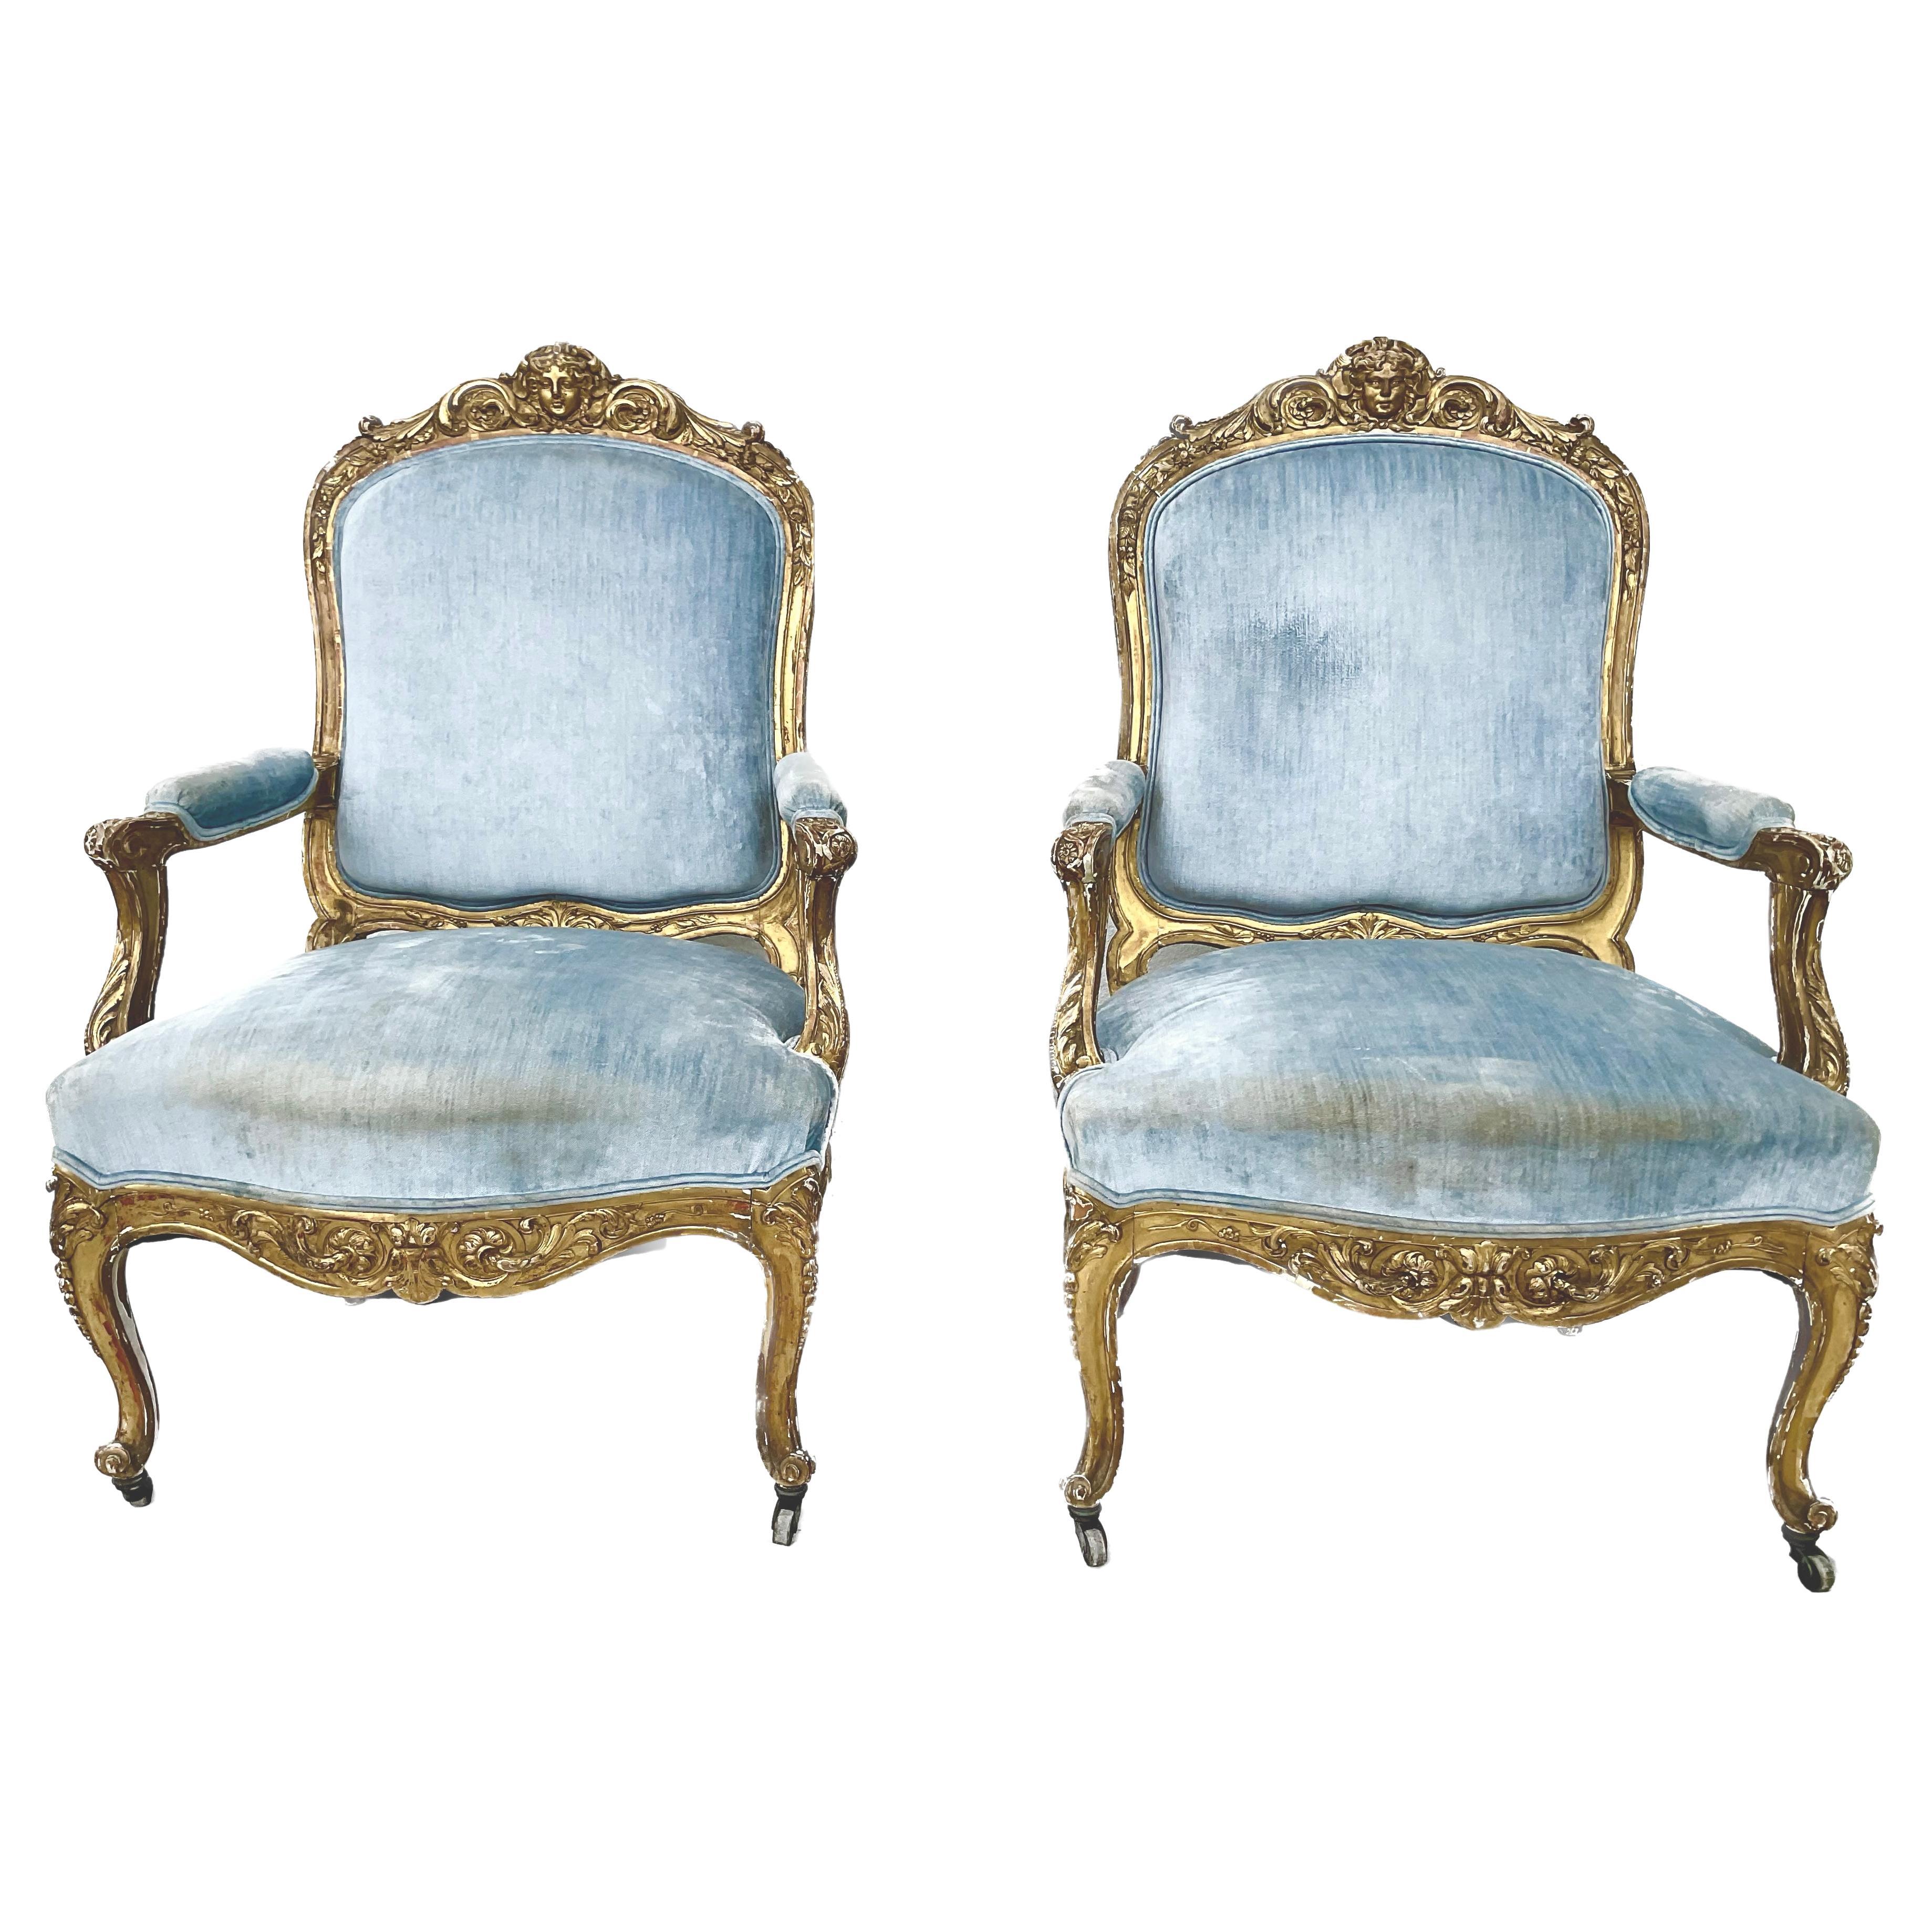 Large Pair of 19th Century Italian Carved Giltwood Armchairs